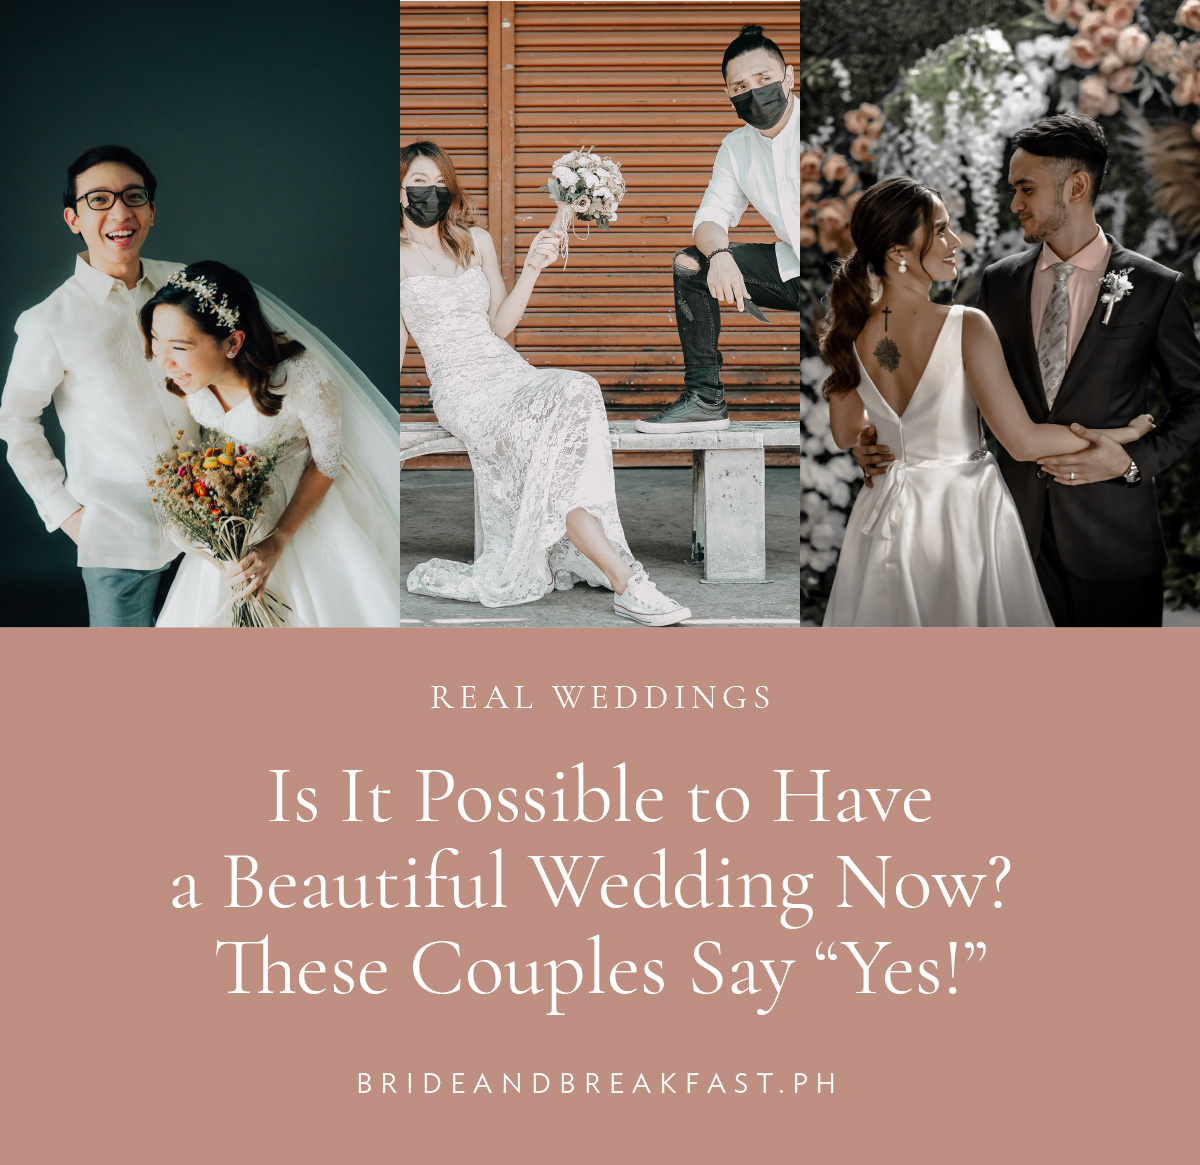 Is It Possible to Have a Beautiful Wedding Now? These Couples Say “Yes!”